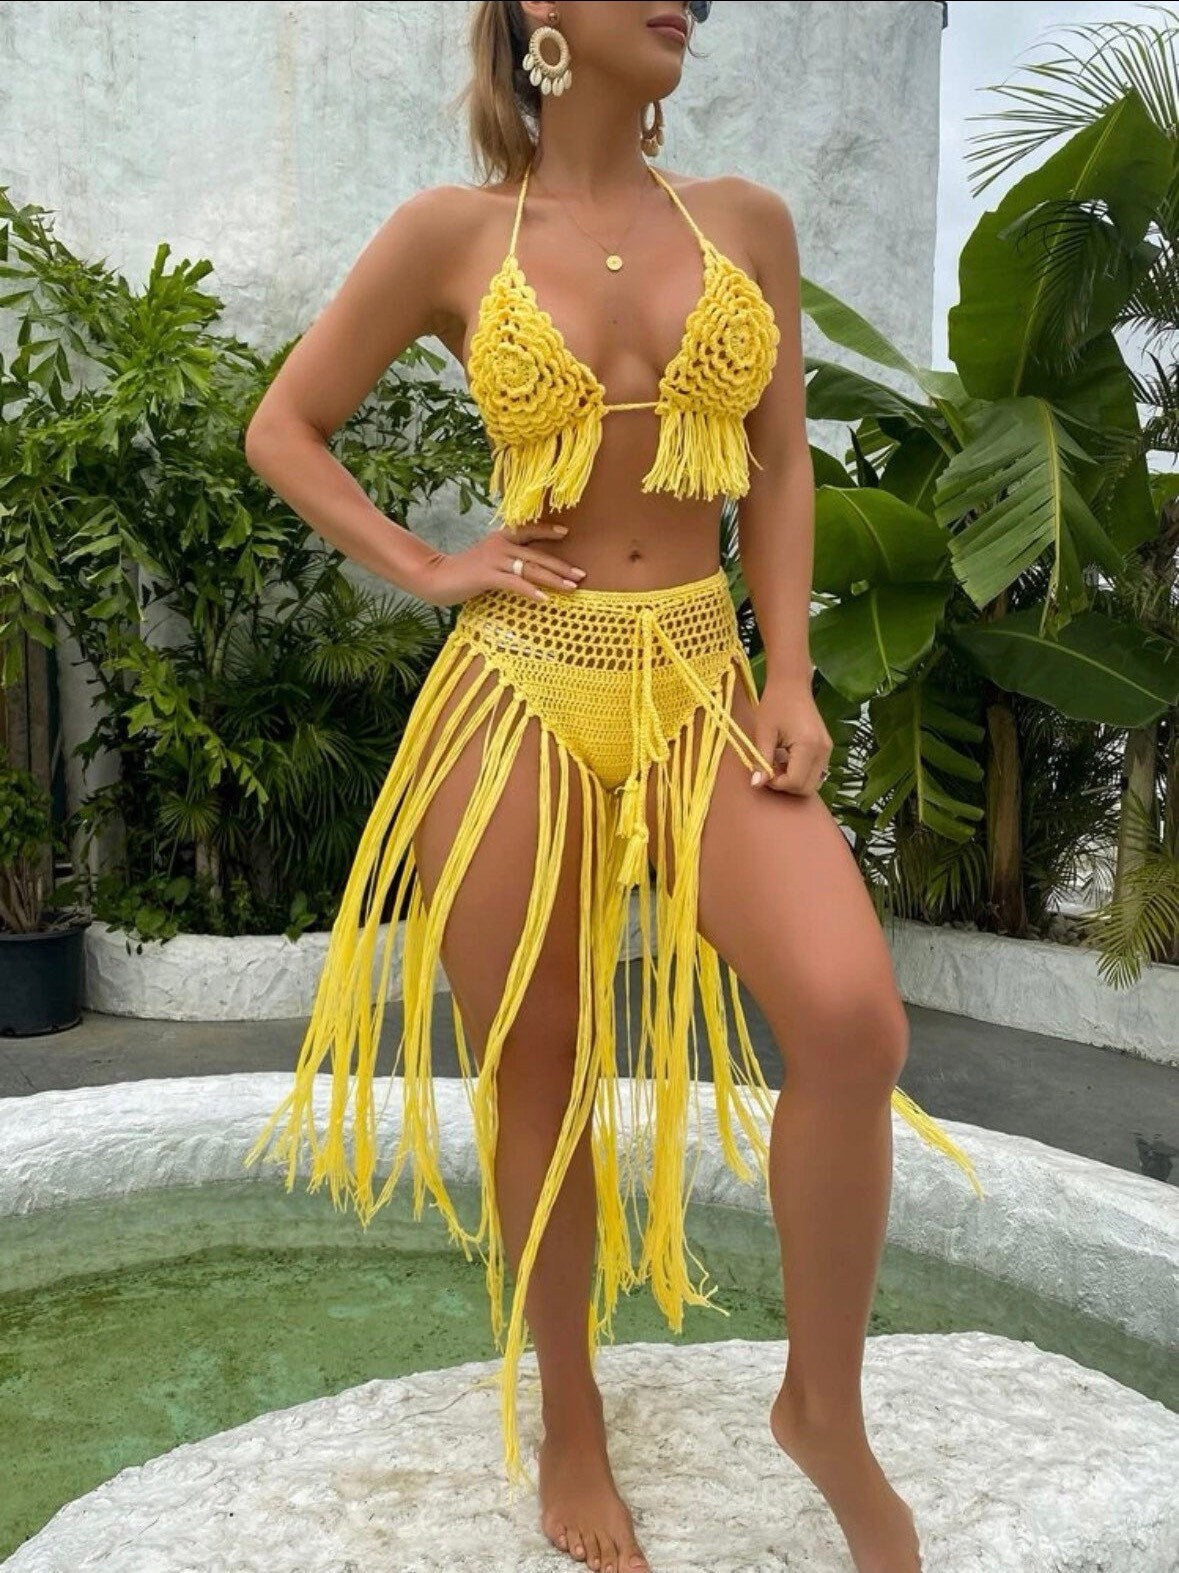 The Sexy Joanna Crochet 2 Piece Crochet Swim Cover Up Set Hand Knitted Fabric Sleeveless Bra top with Shorts Fringe Trim Detail Super Soft